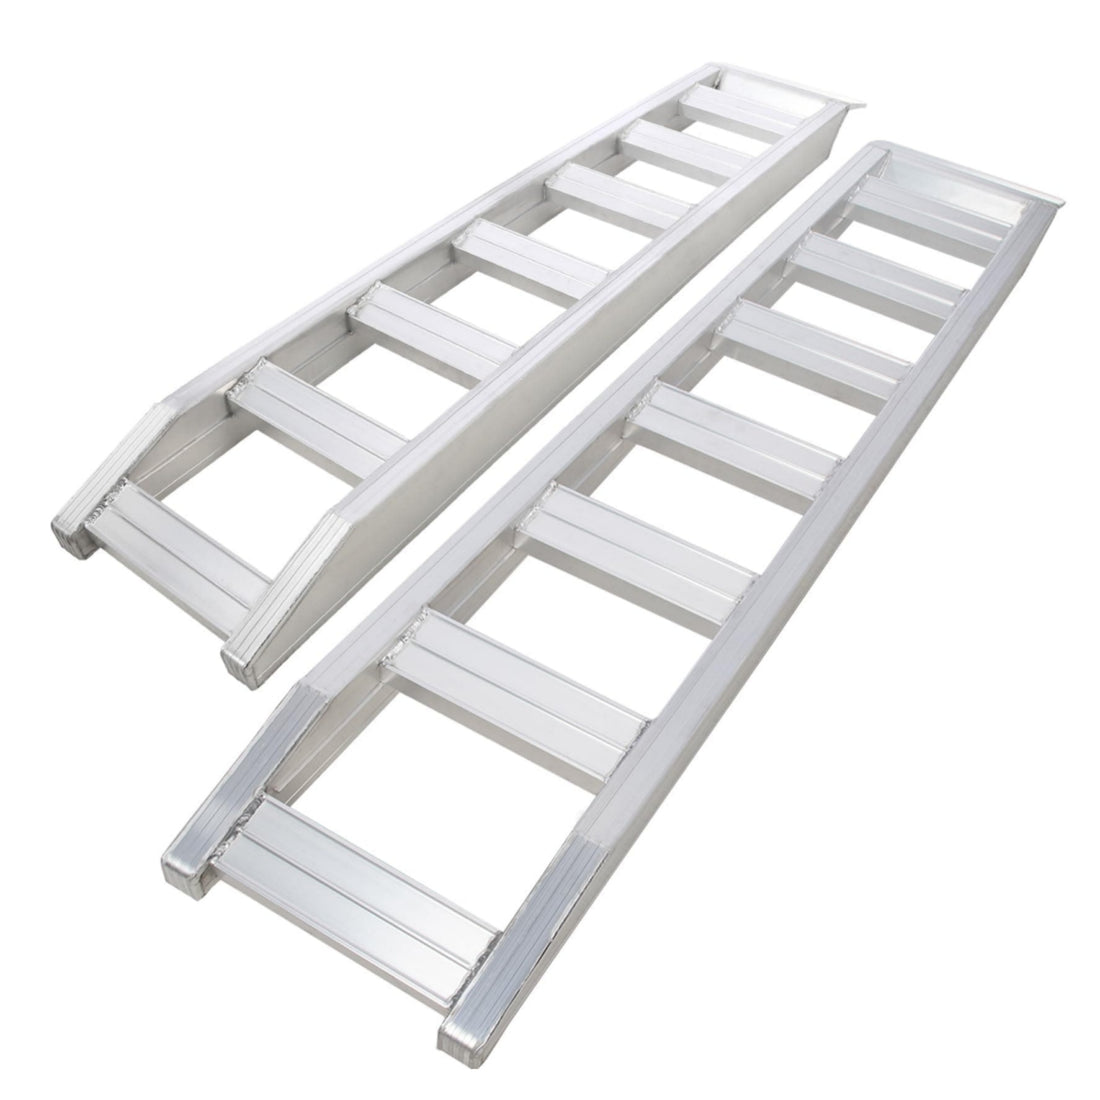 Aluminum Trailer Ramps, 8810 lbs Heavy-Duty Truck Ramps with Top Hook Attaching End, Universal Loading Ramp for Motorcycle, ATV/UTV, Tractor, Lawnmower, Snow Blower,2Pcs